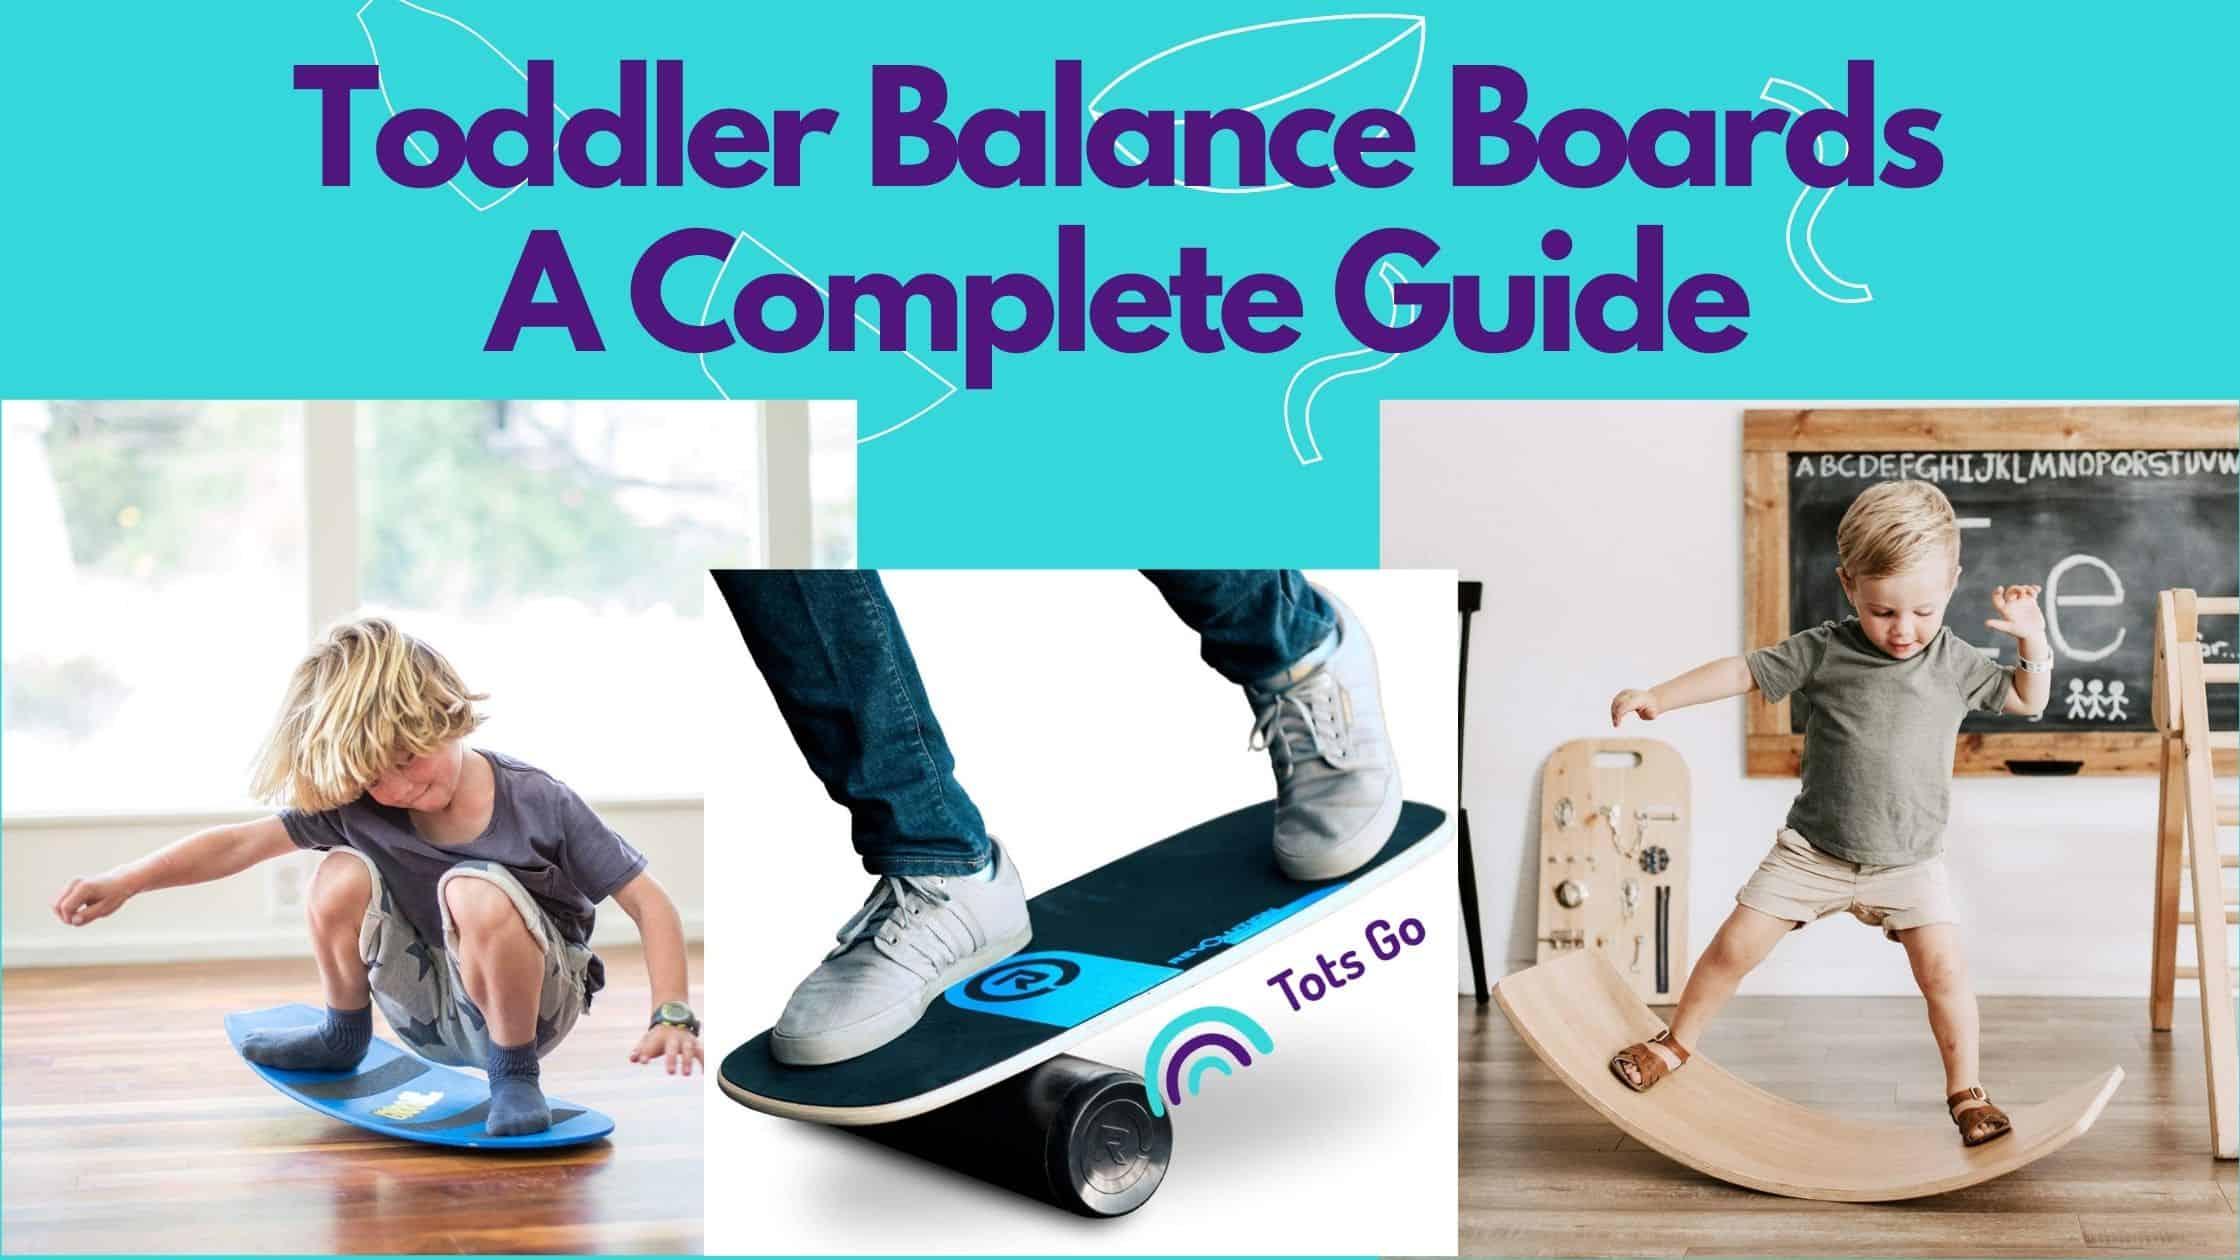 Toddler Balance Boards A Complete Guide